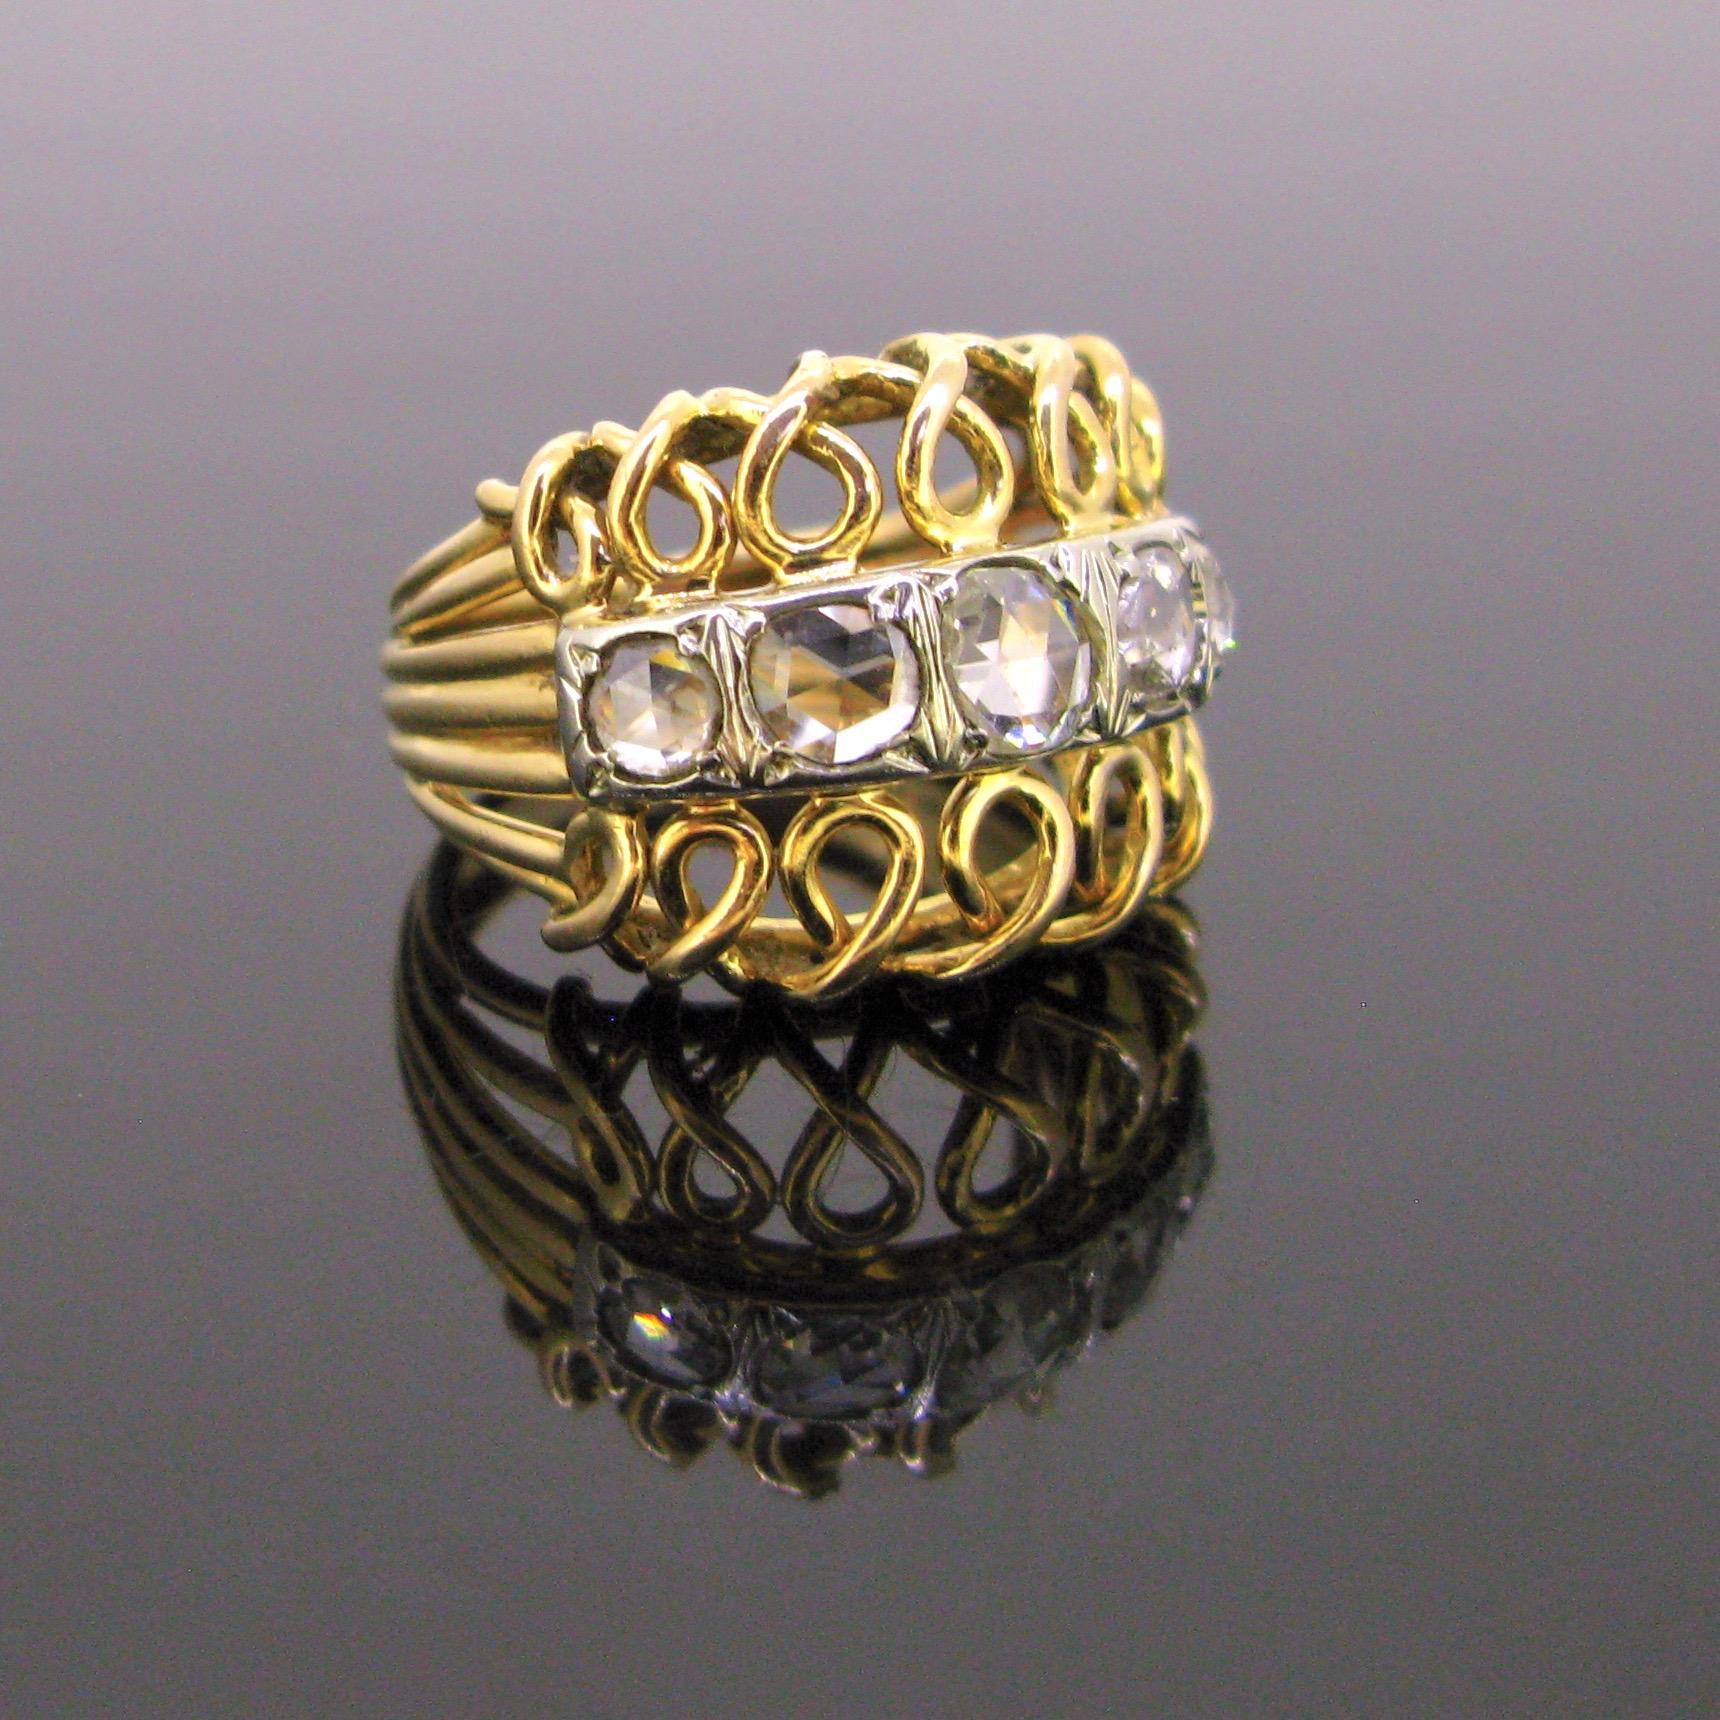 Weight: 9,86gr

Metal: 18kt Yellow Gold and Platinum

Stones: 5 Diamonds
• Cut: Rose cut
• Carat Weight: 1.50ct approx.
• Color: H/I
• Clarity: VS/SI

Condition: Very Good

Comments: This beautiful ring from the Sixties is made in 18kt yellow gold